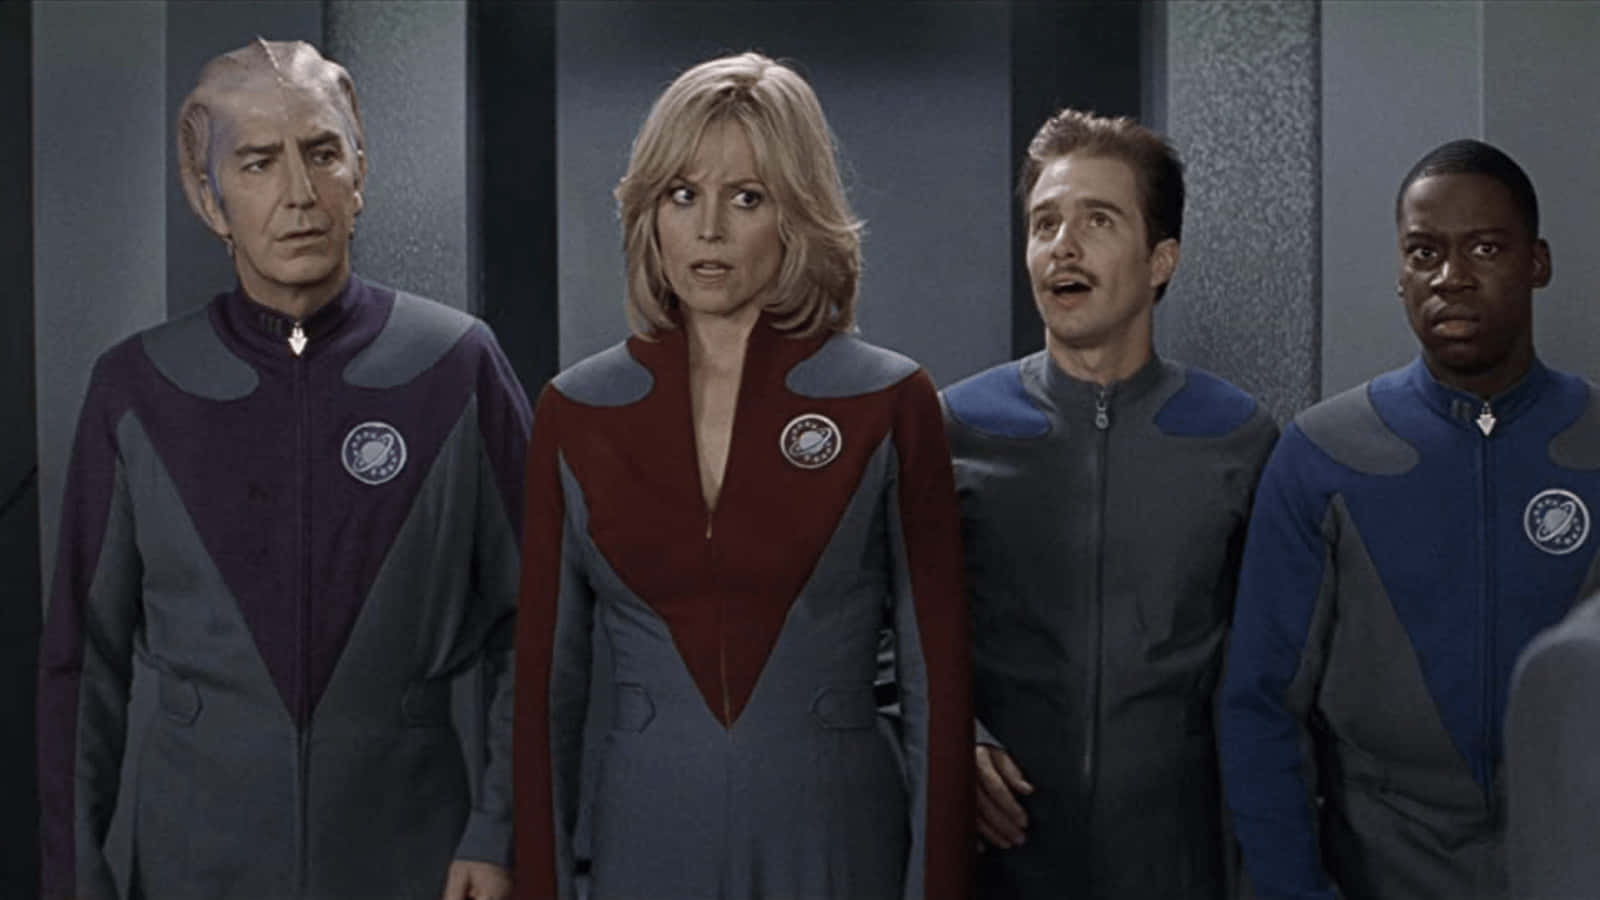 The heroic Galaxy Quest crew embarks on an adventure Wallpaper